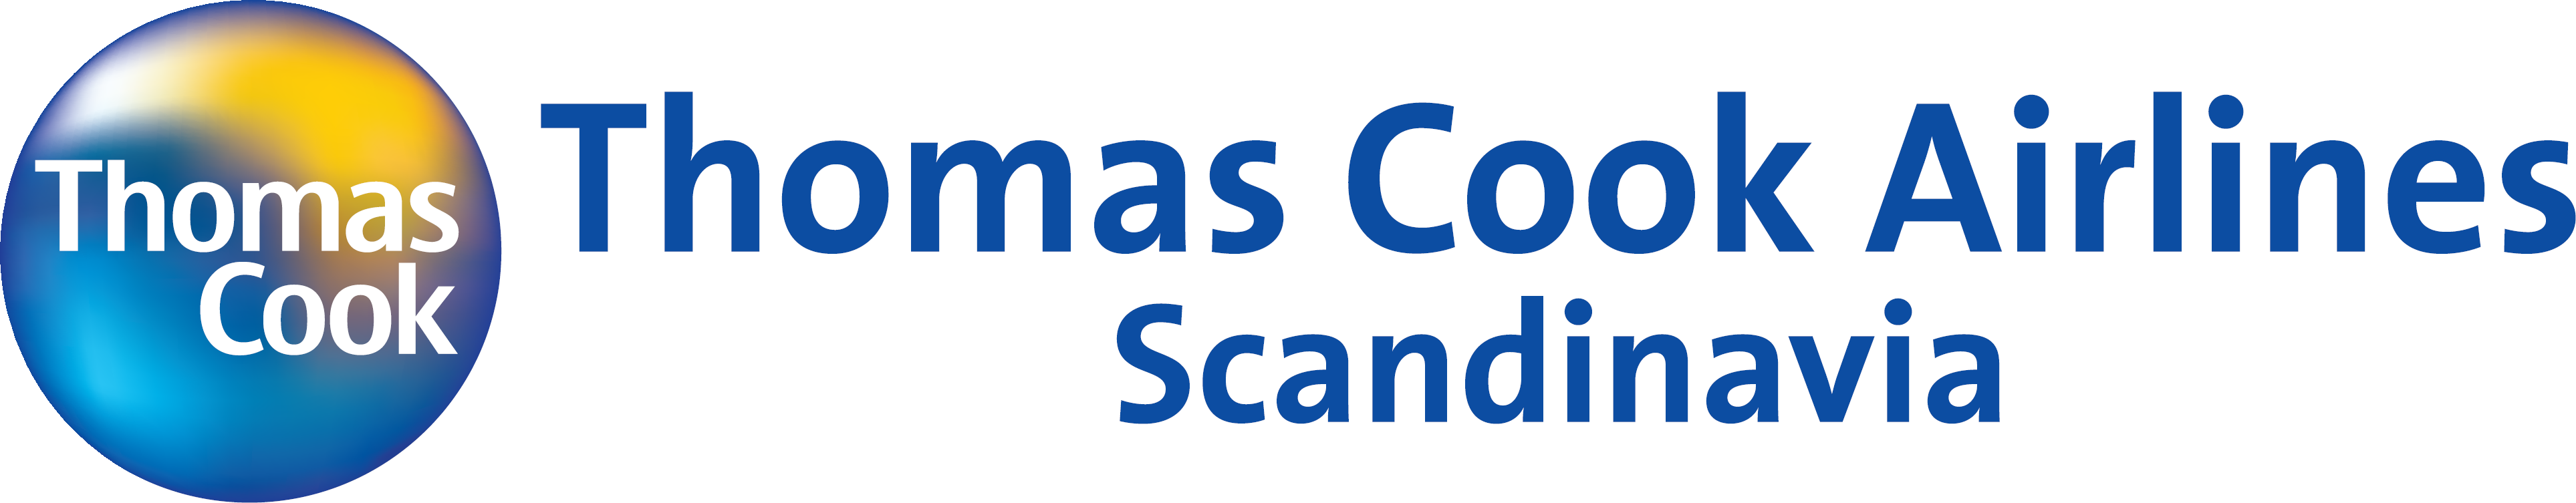 Image result for Thomas Cook Airlines Scandinavia logo